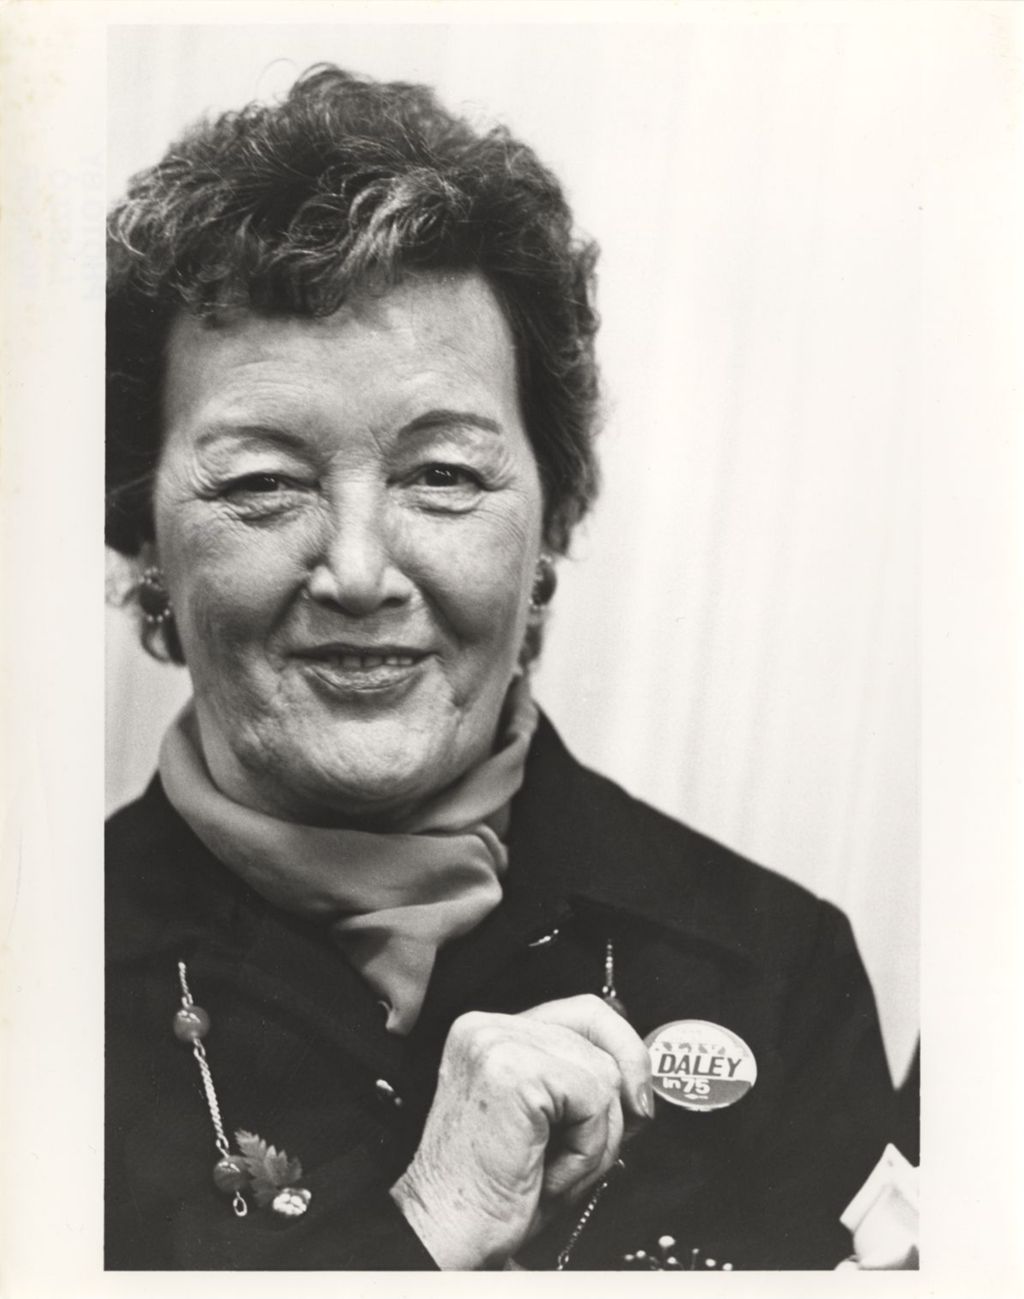 Miniature of Eleanor Daley wearing a Daley campaign button